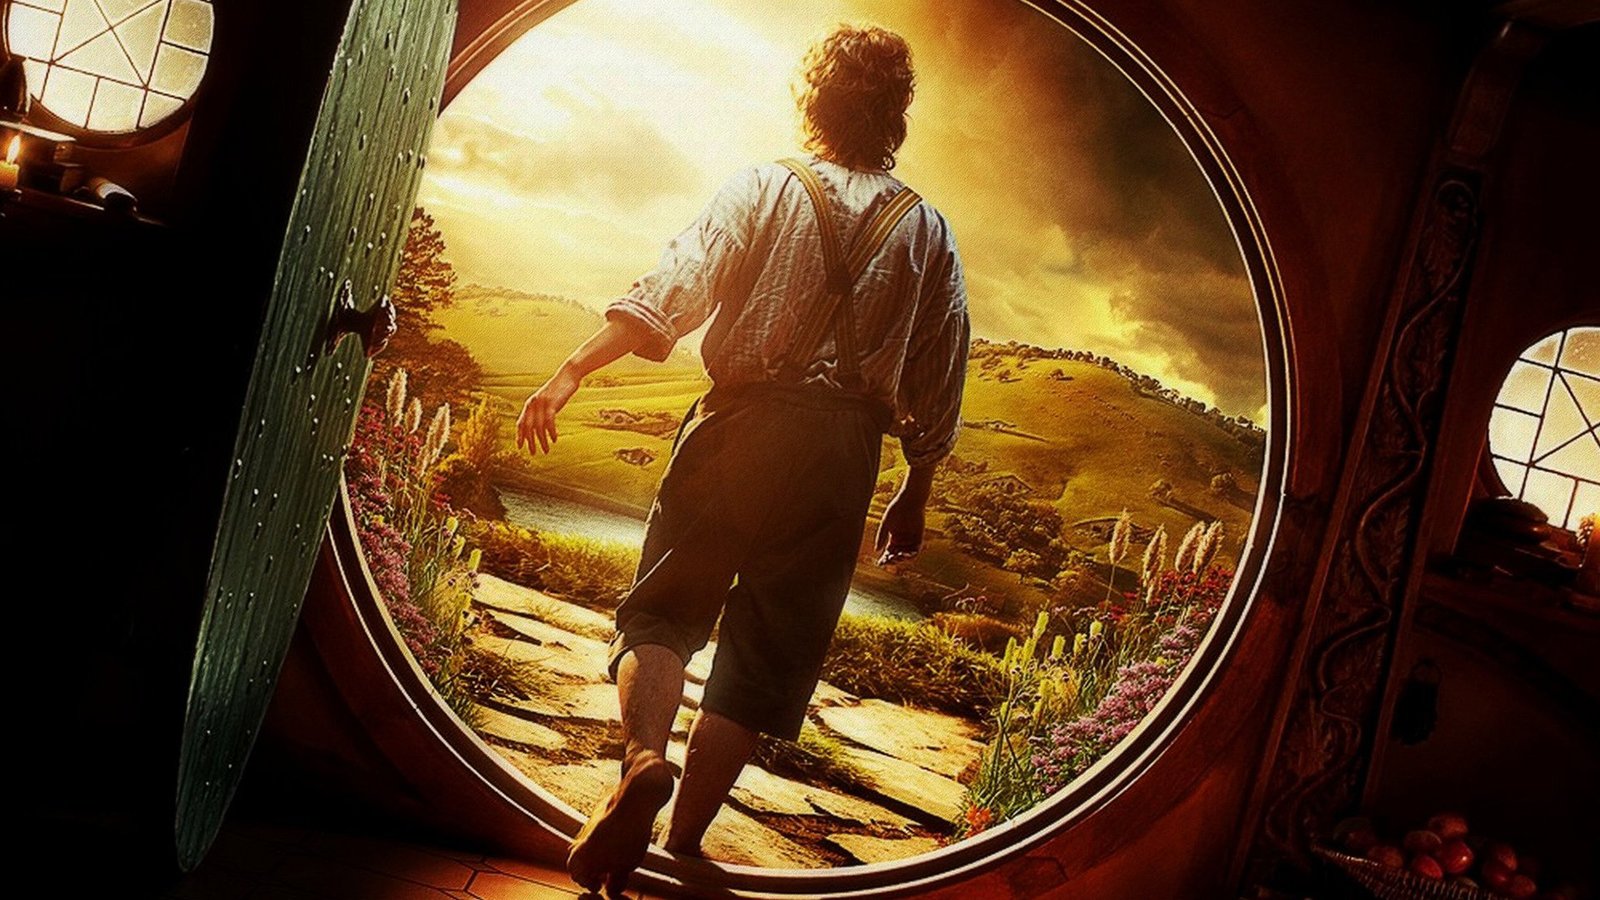  / The Hobbit: An Unexpected Journey